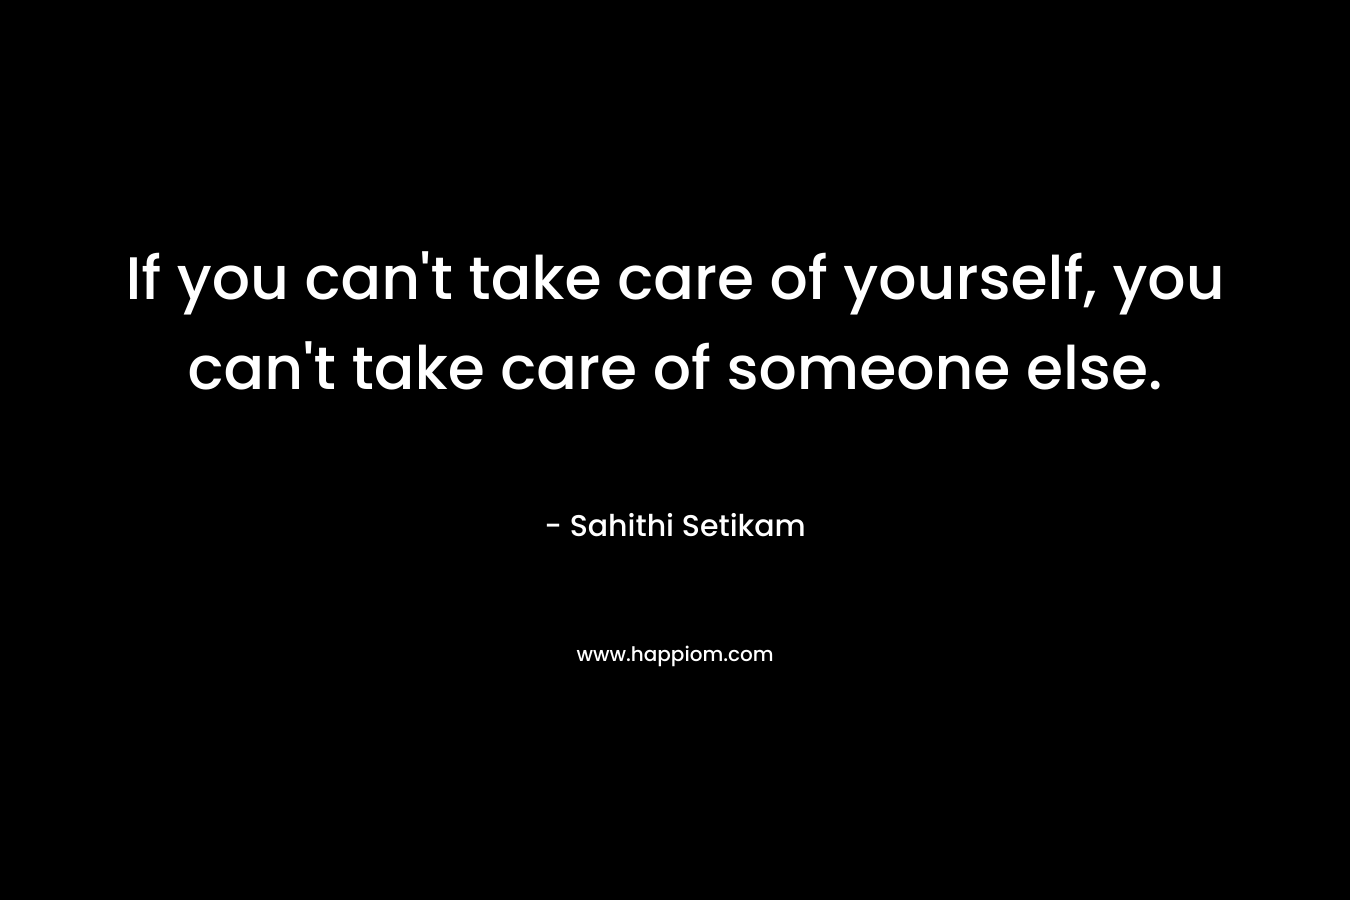 If you can't take care of yourself, you can't take care of someone else.